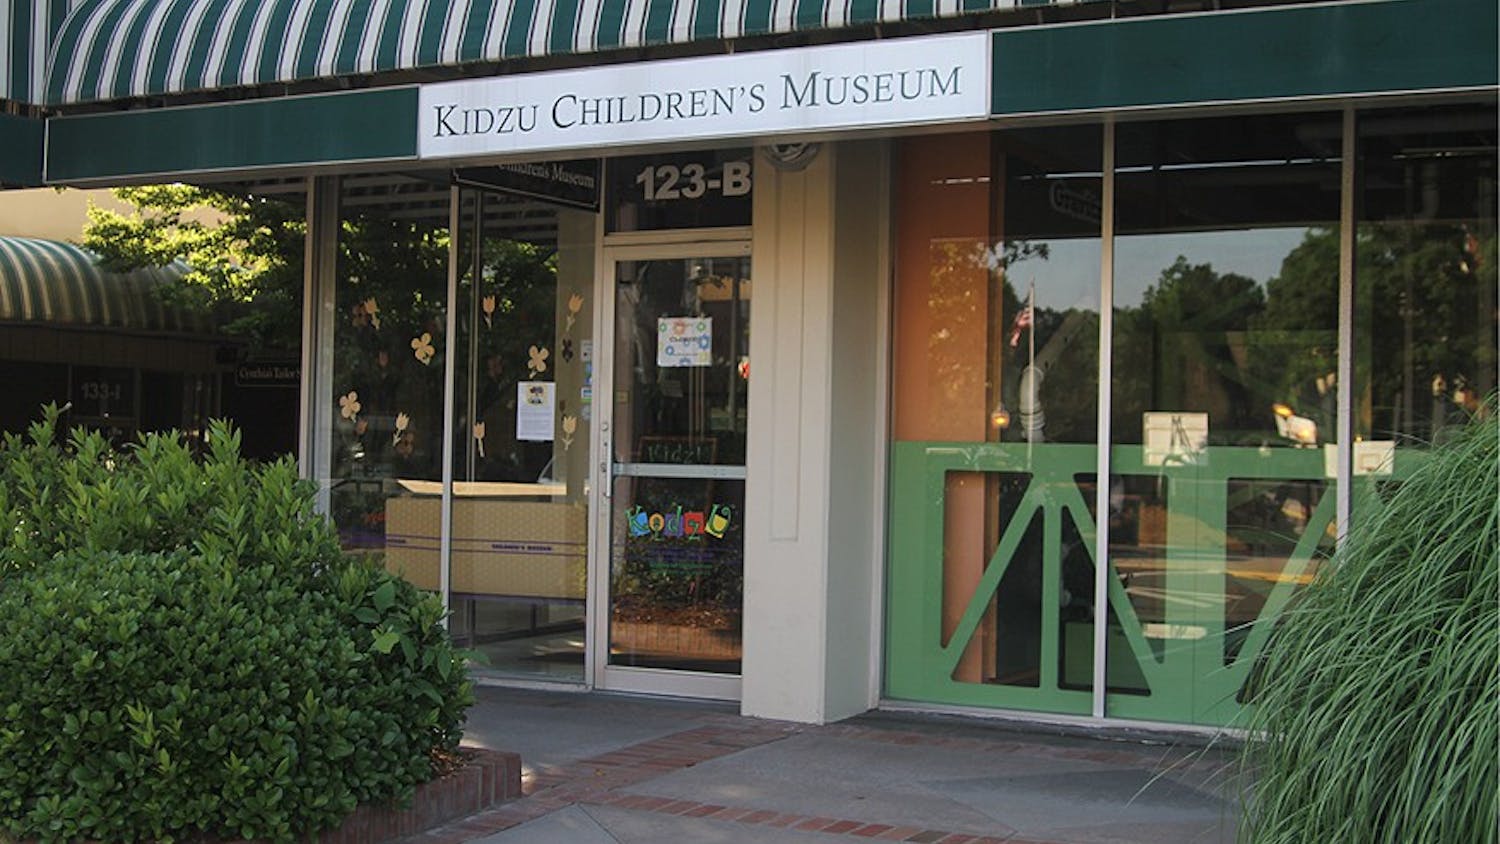 	Kidzu Children’s Museum is planning to open a new location in the Wallace Deck by 2016.